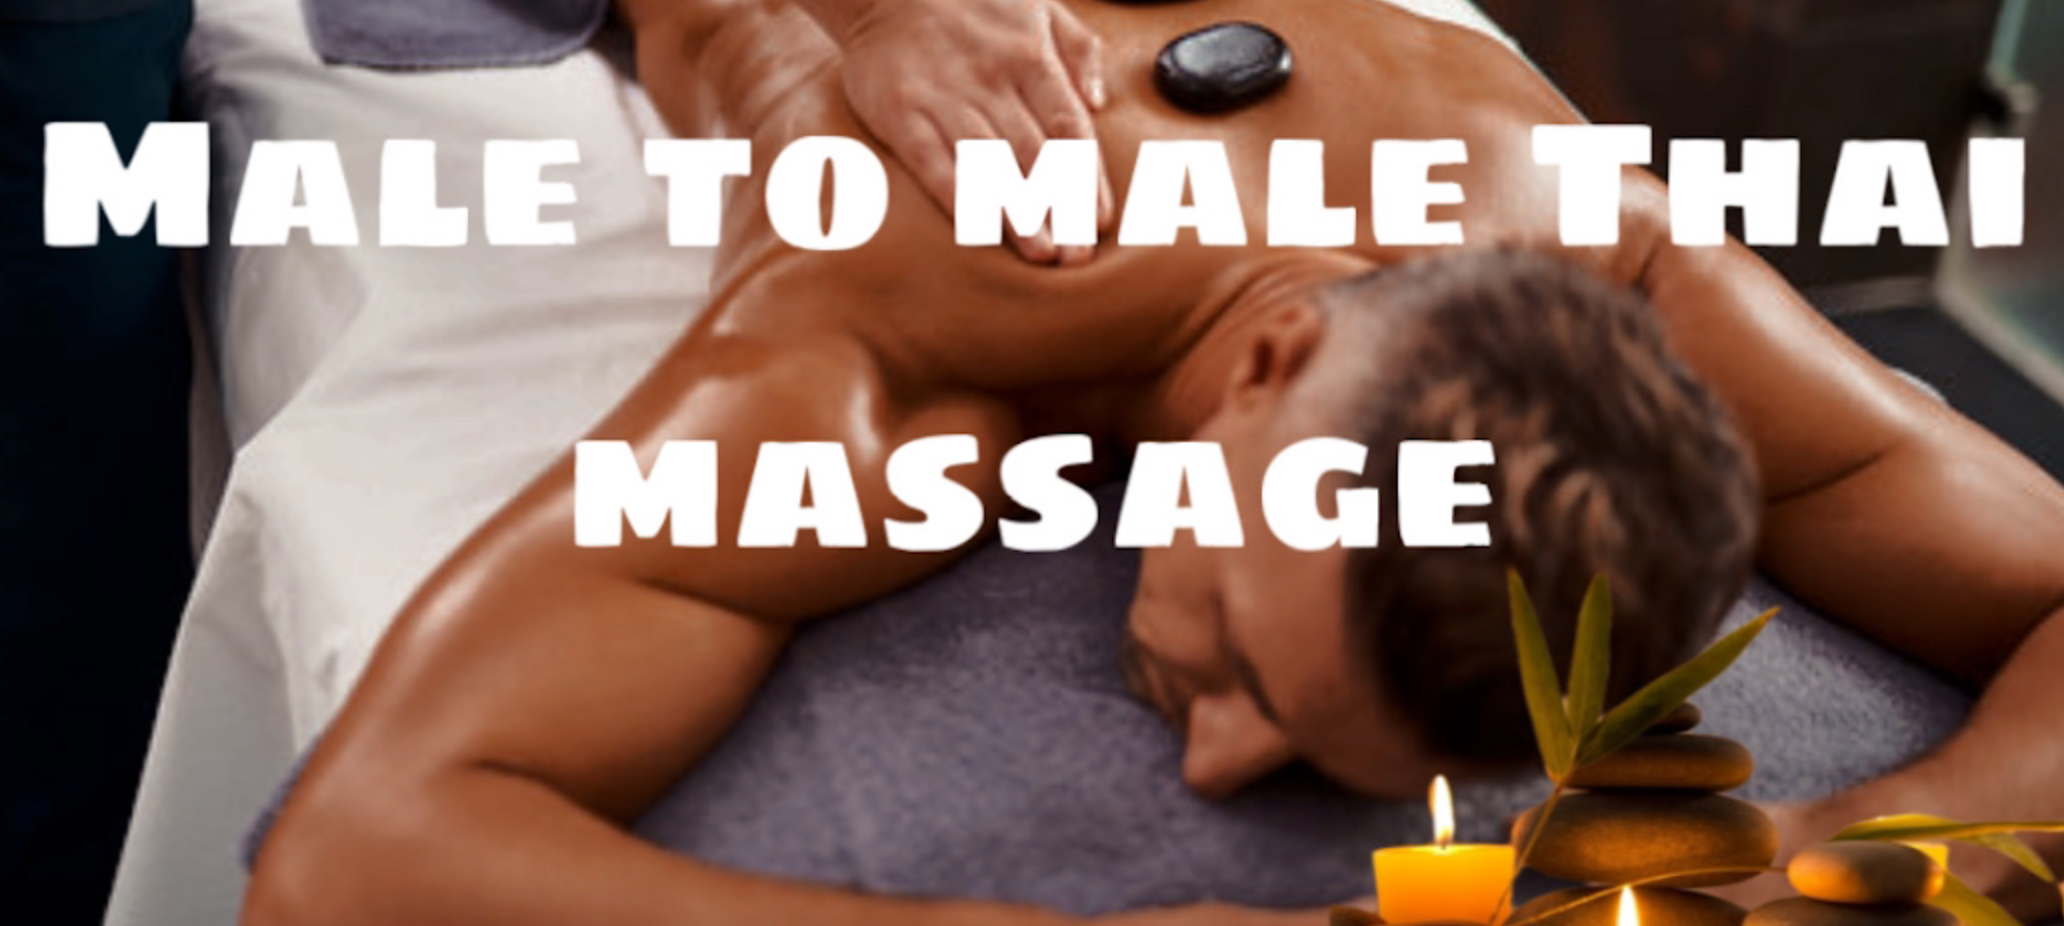 man having massage therapy at male to male thai massage